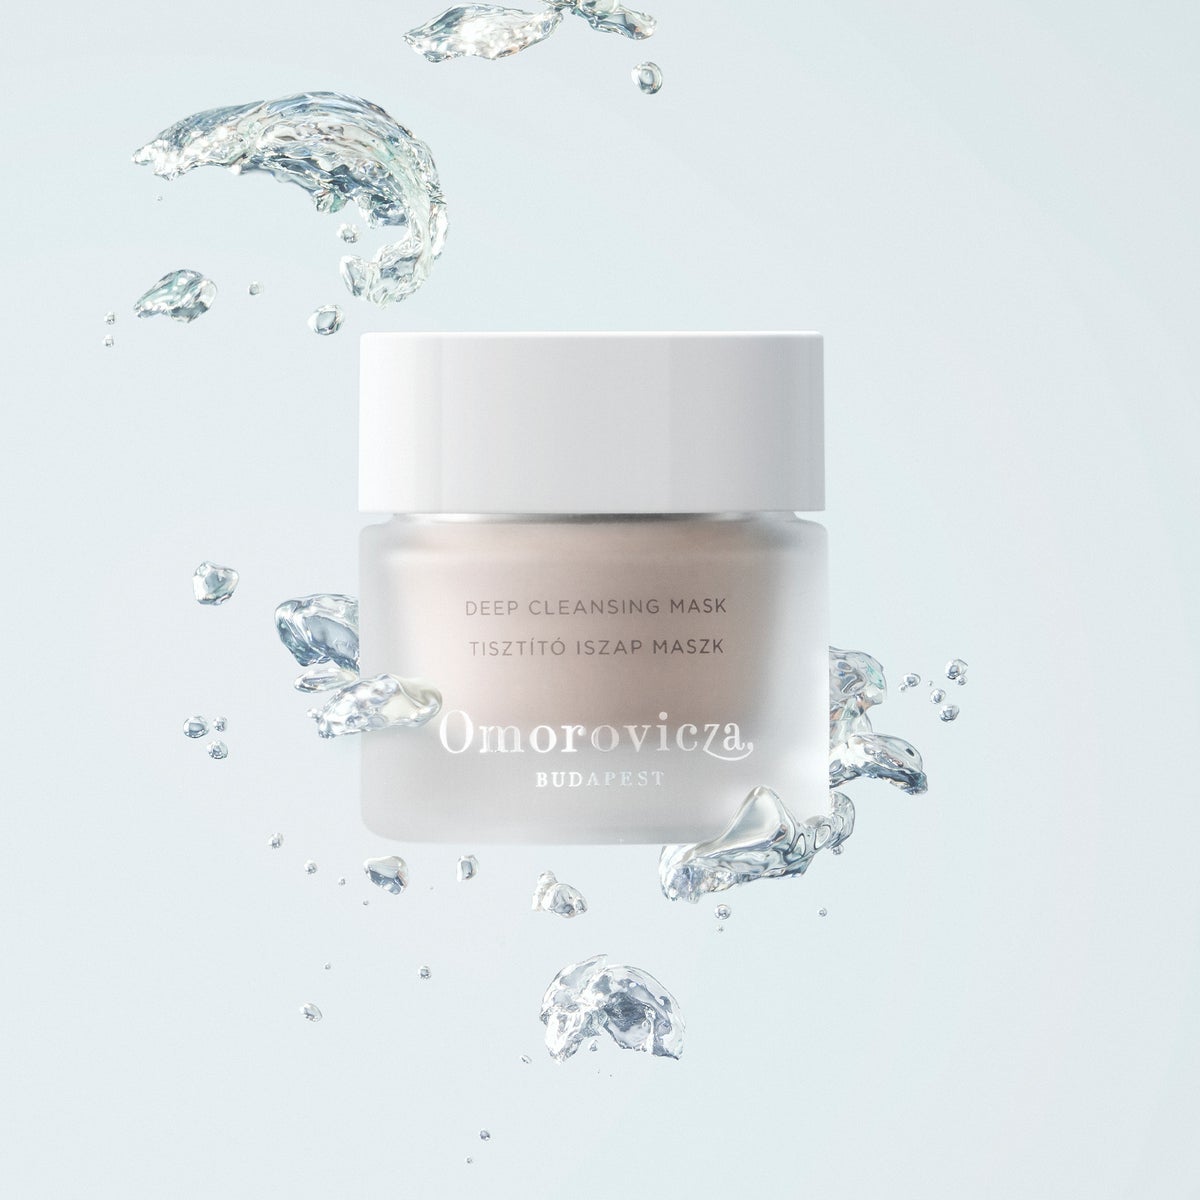 Just One Change deep cleansing mask